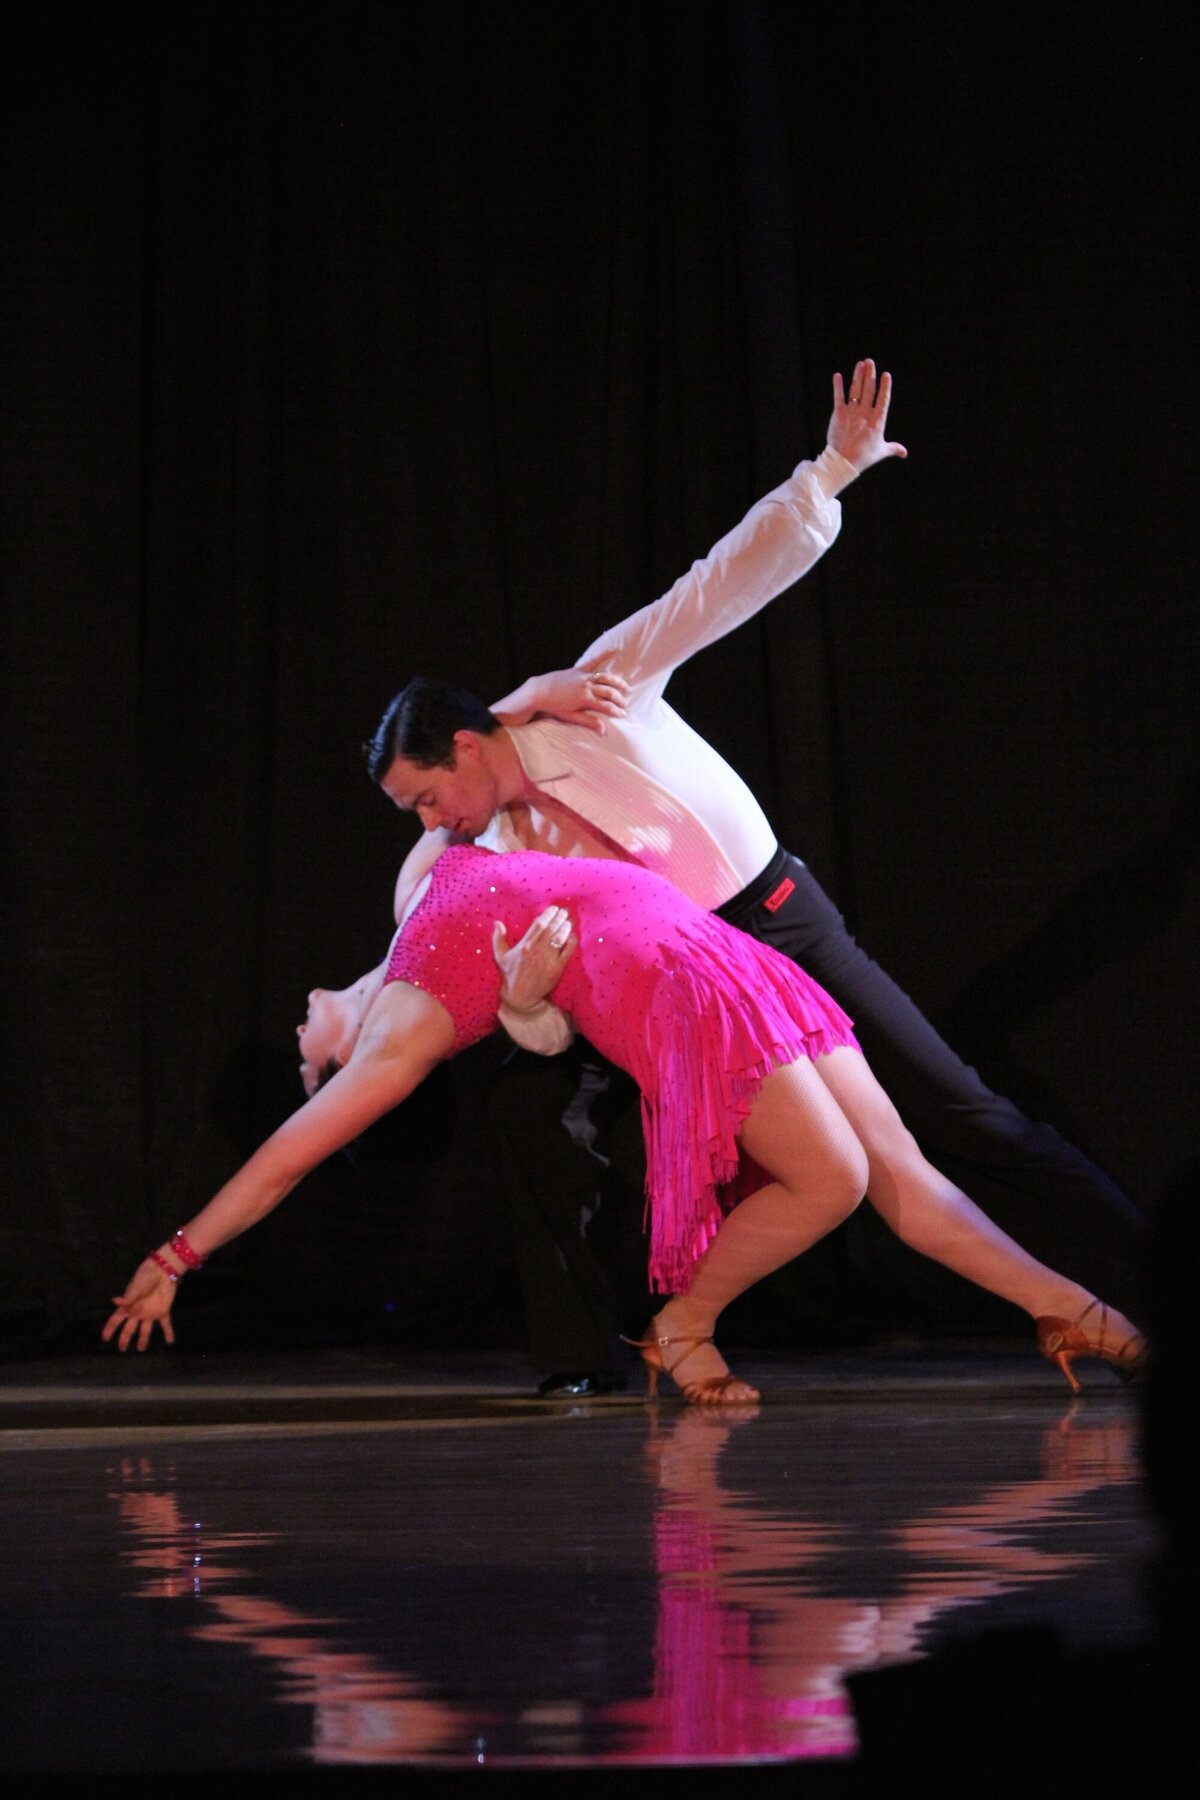 Dance competitors during a Dance Competition.